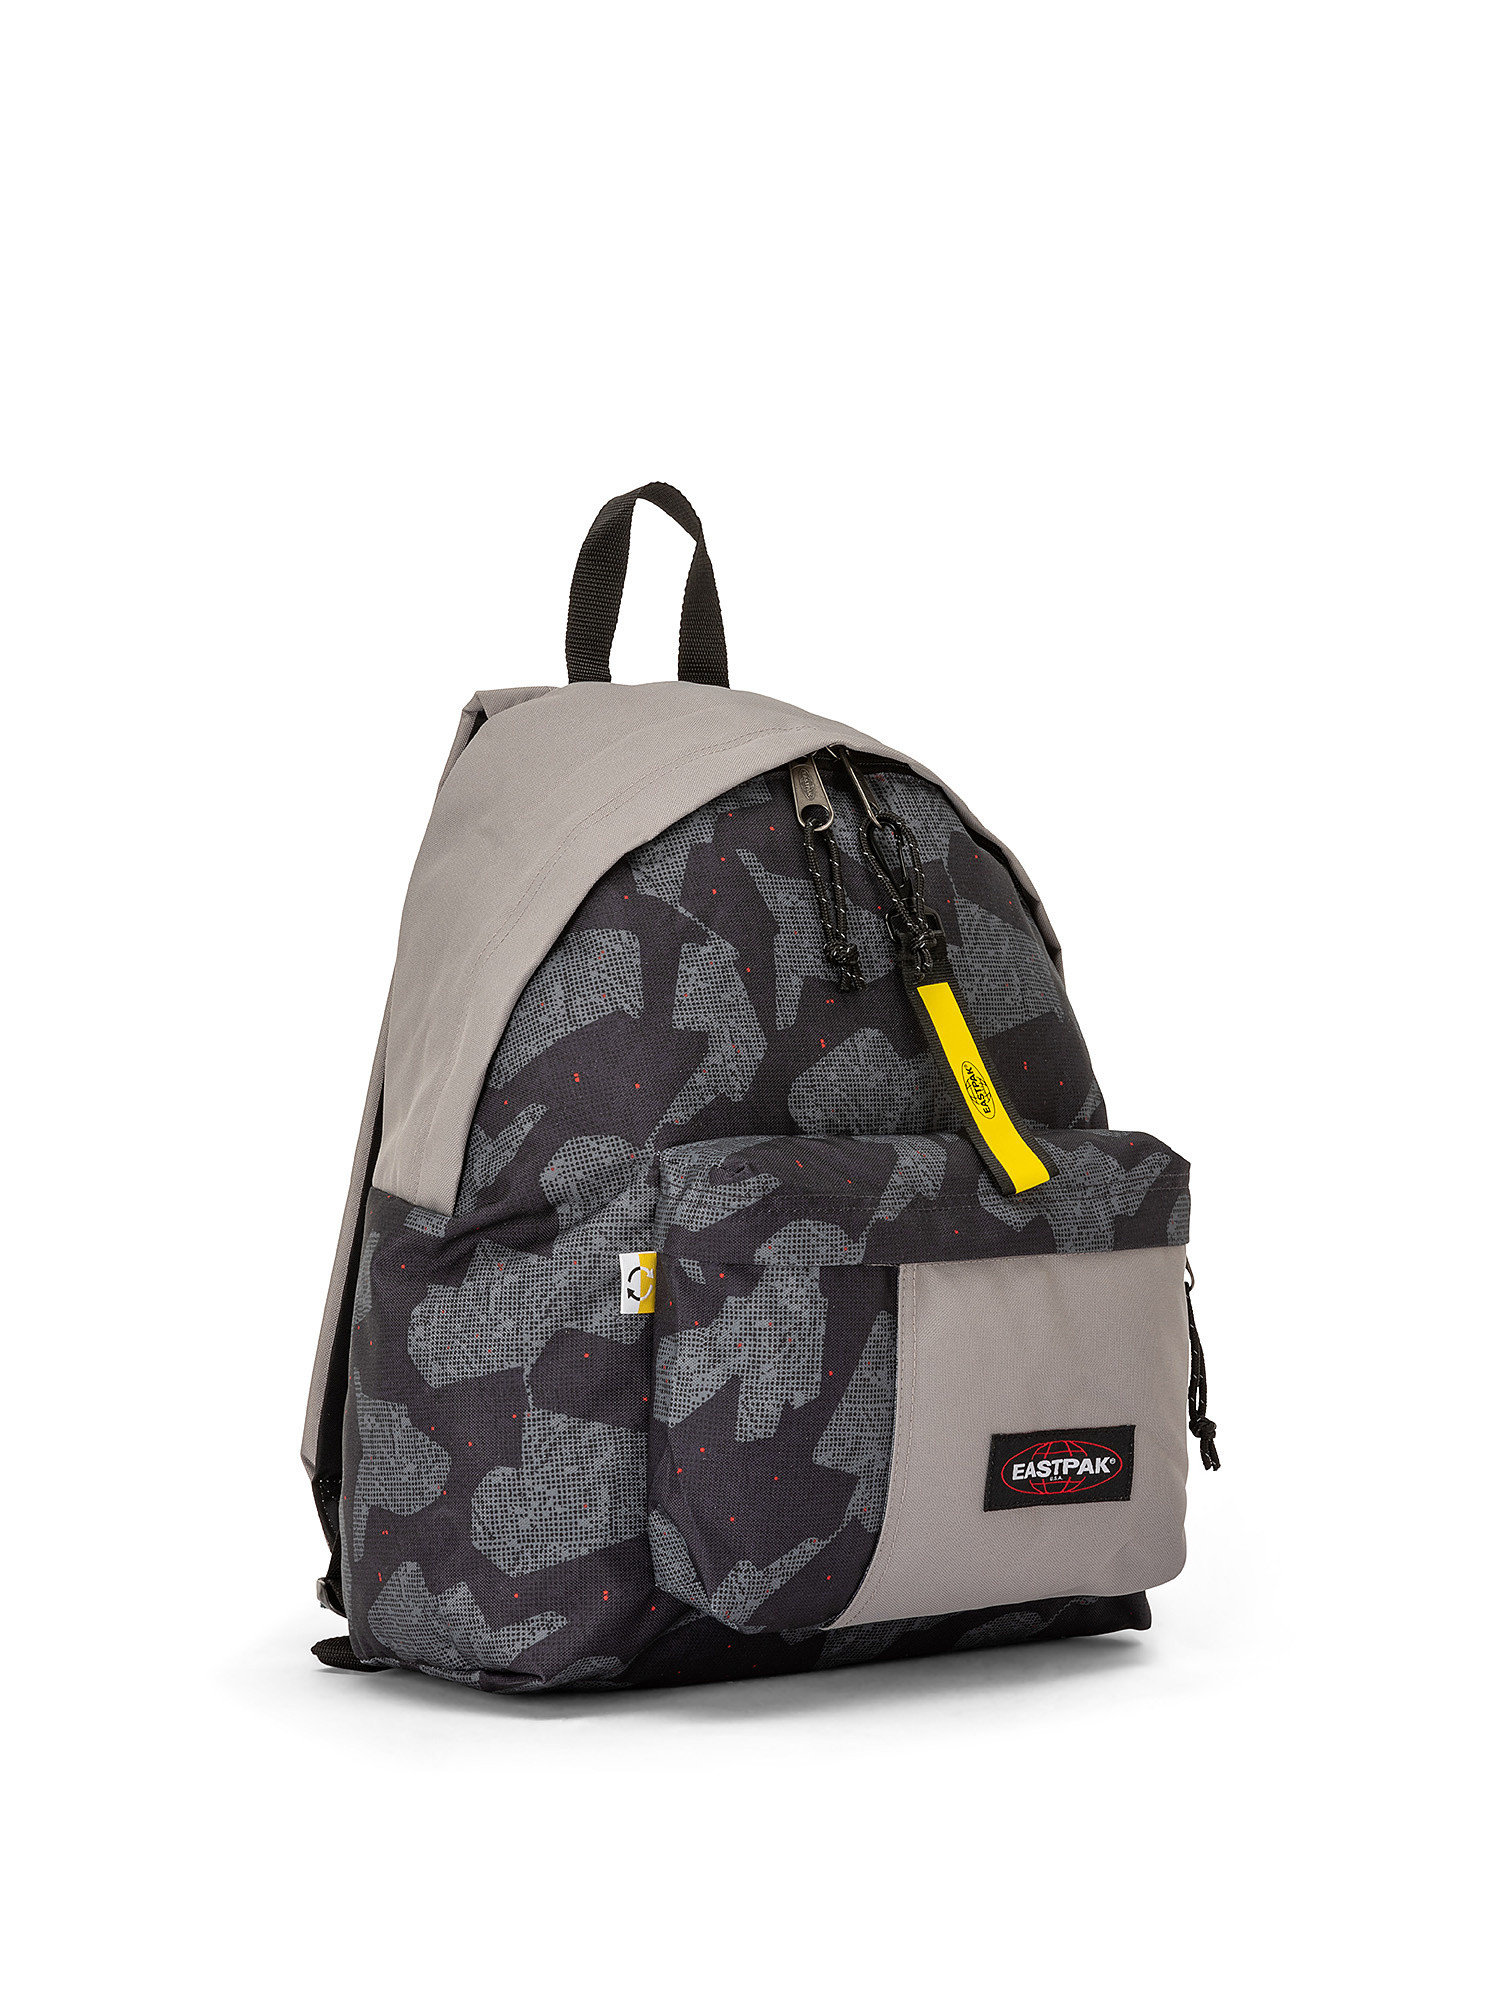 Backpack with laptop compartment and removable key ring, Grey, large image number 1